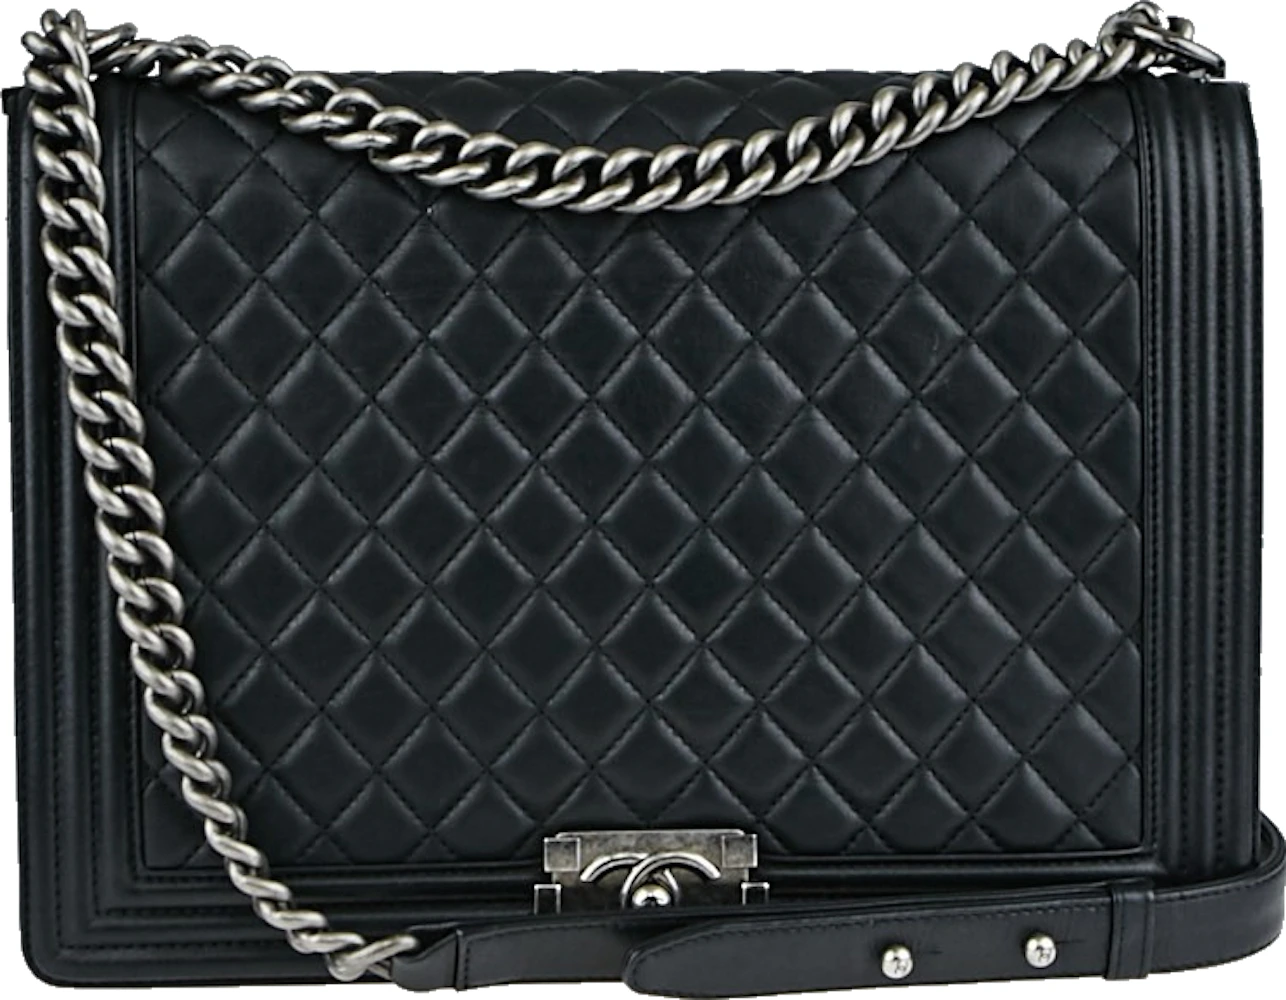 Chanel Large Black Quilted Leather Large Boy Bag